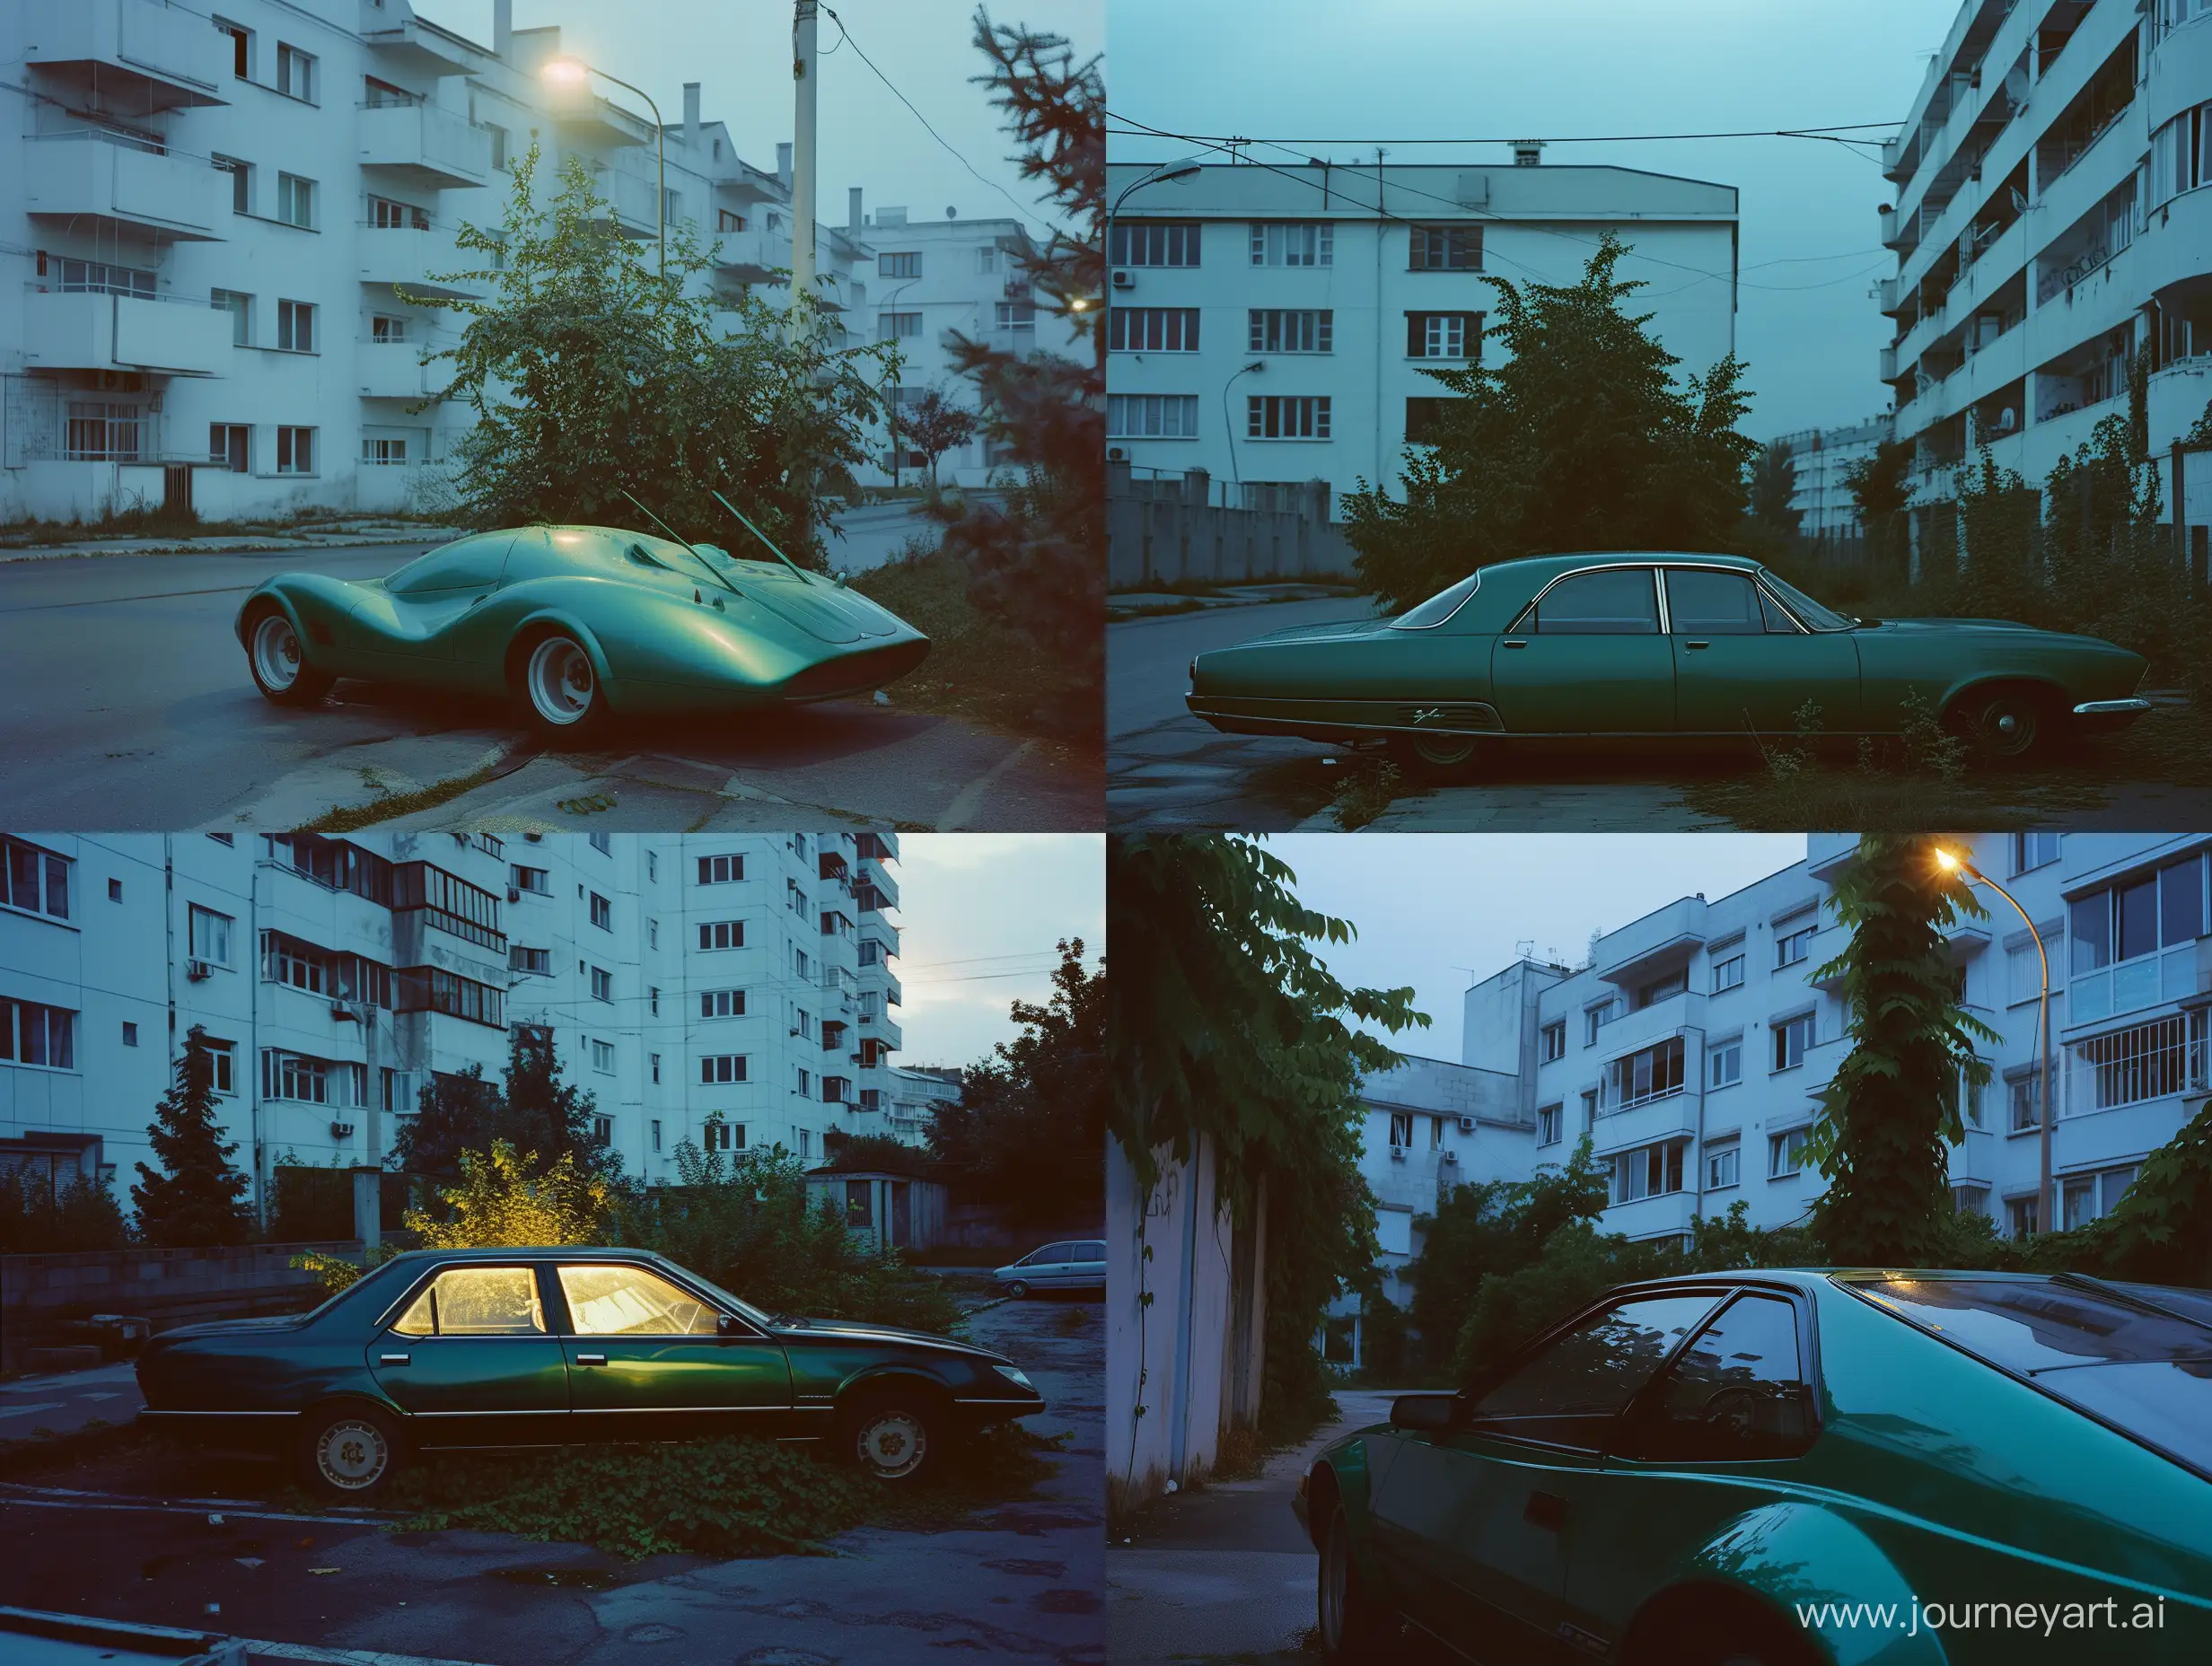 a liminal space from romania shot by alexandrutdr for a magazine about liminal spaces aesthetics with a medium format film camera, shiny green retro car with smooth curves, extremely controlled light overgrowth on a residential street with white brutalist apartment buildings, moody, clean, minimalistic, 1990s aesthetic, shot at dawn, shot at dusk, modern digital and glitched colors, soft highlights, deep blacks, imperfect, golden ratio composition by expert creative, limbo